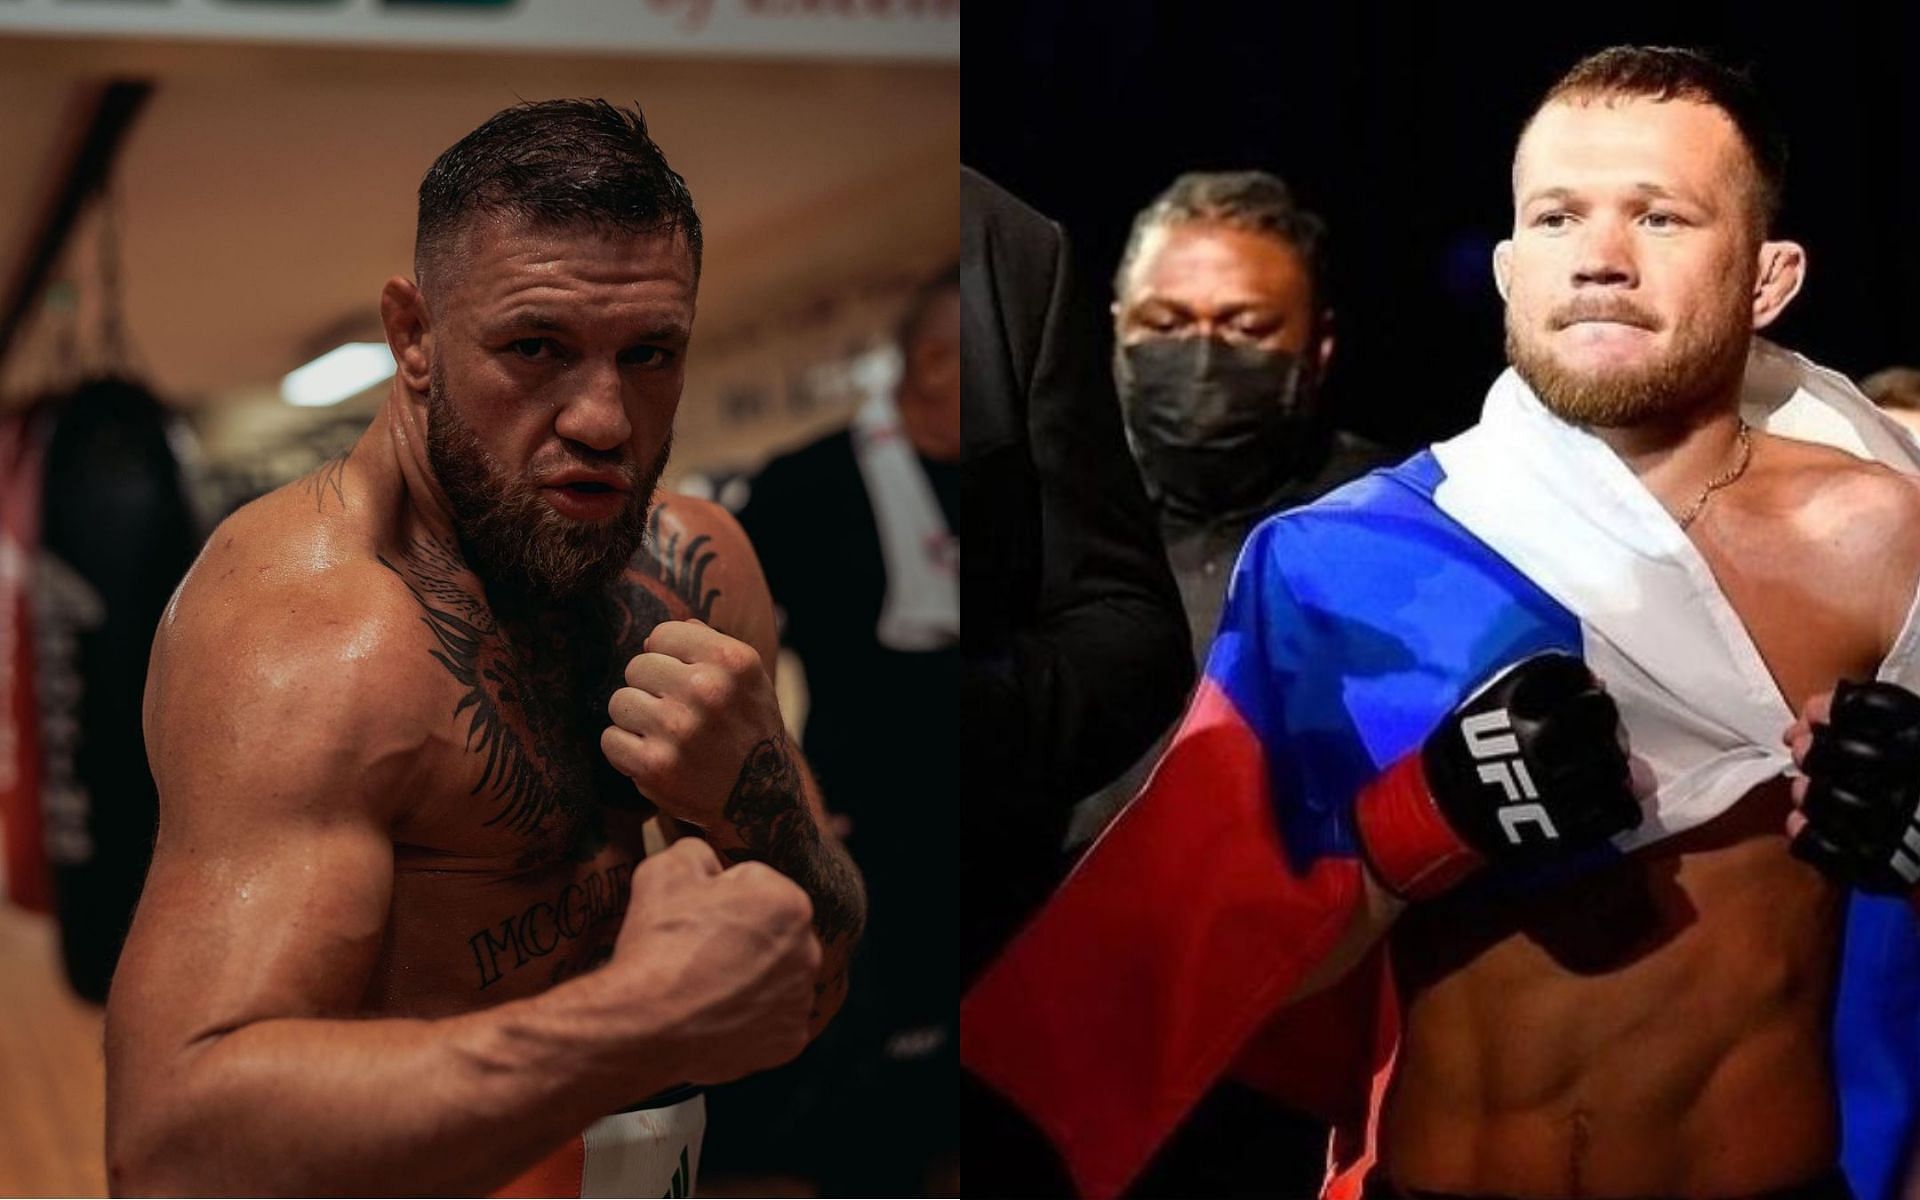 Conor McGregor (Left) and Petr Yan (Right) [Images via: @thenotoriousmma and @petr_yan on Instagram]